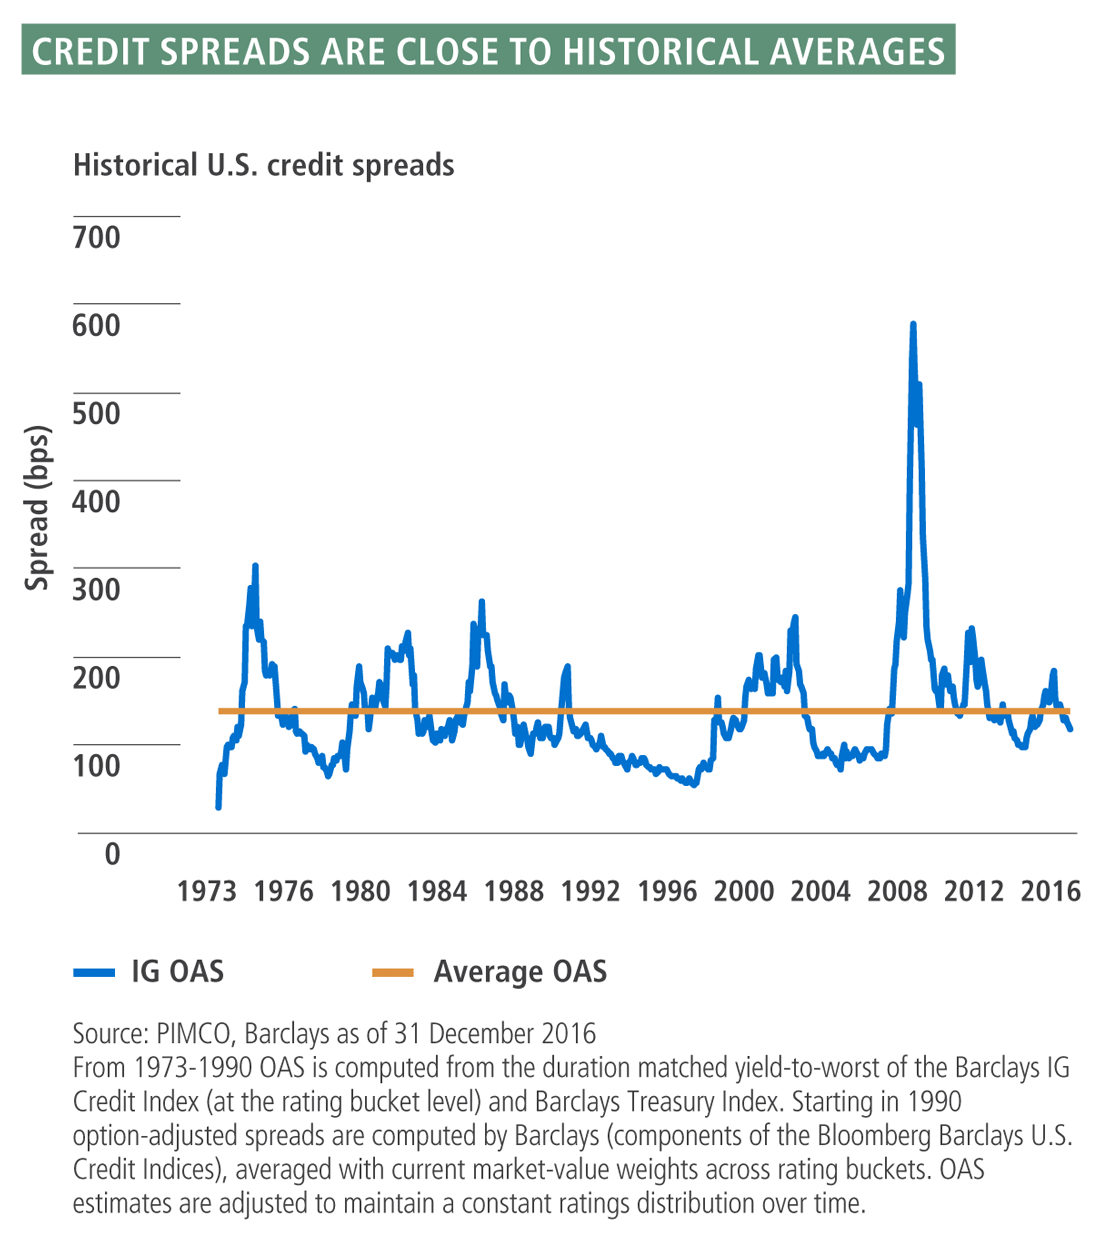 The figure is a line graph showing historical U.S. credit spreads for investment grade from 1973 through year-end 2016. A scale on the Y-axis reflects option-adjusted spreads of the Barclays IG Credit Index over the Barclay’s Treasury Index. Spreads in December 2016 were around 120, close to their historical average of about 140 basis points, shown by a horizontal line. Spreads have been trending downward in recent years, from earlier peaks of about 180 in late 2015 early 2016, 220 in 2012, and around the outlying peak of 580 in 2008-2009. For most of the period shown, spreads trade between 80 and 250. They start at a low of about 25 in 1973 before reaching a more normal range by 1974.